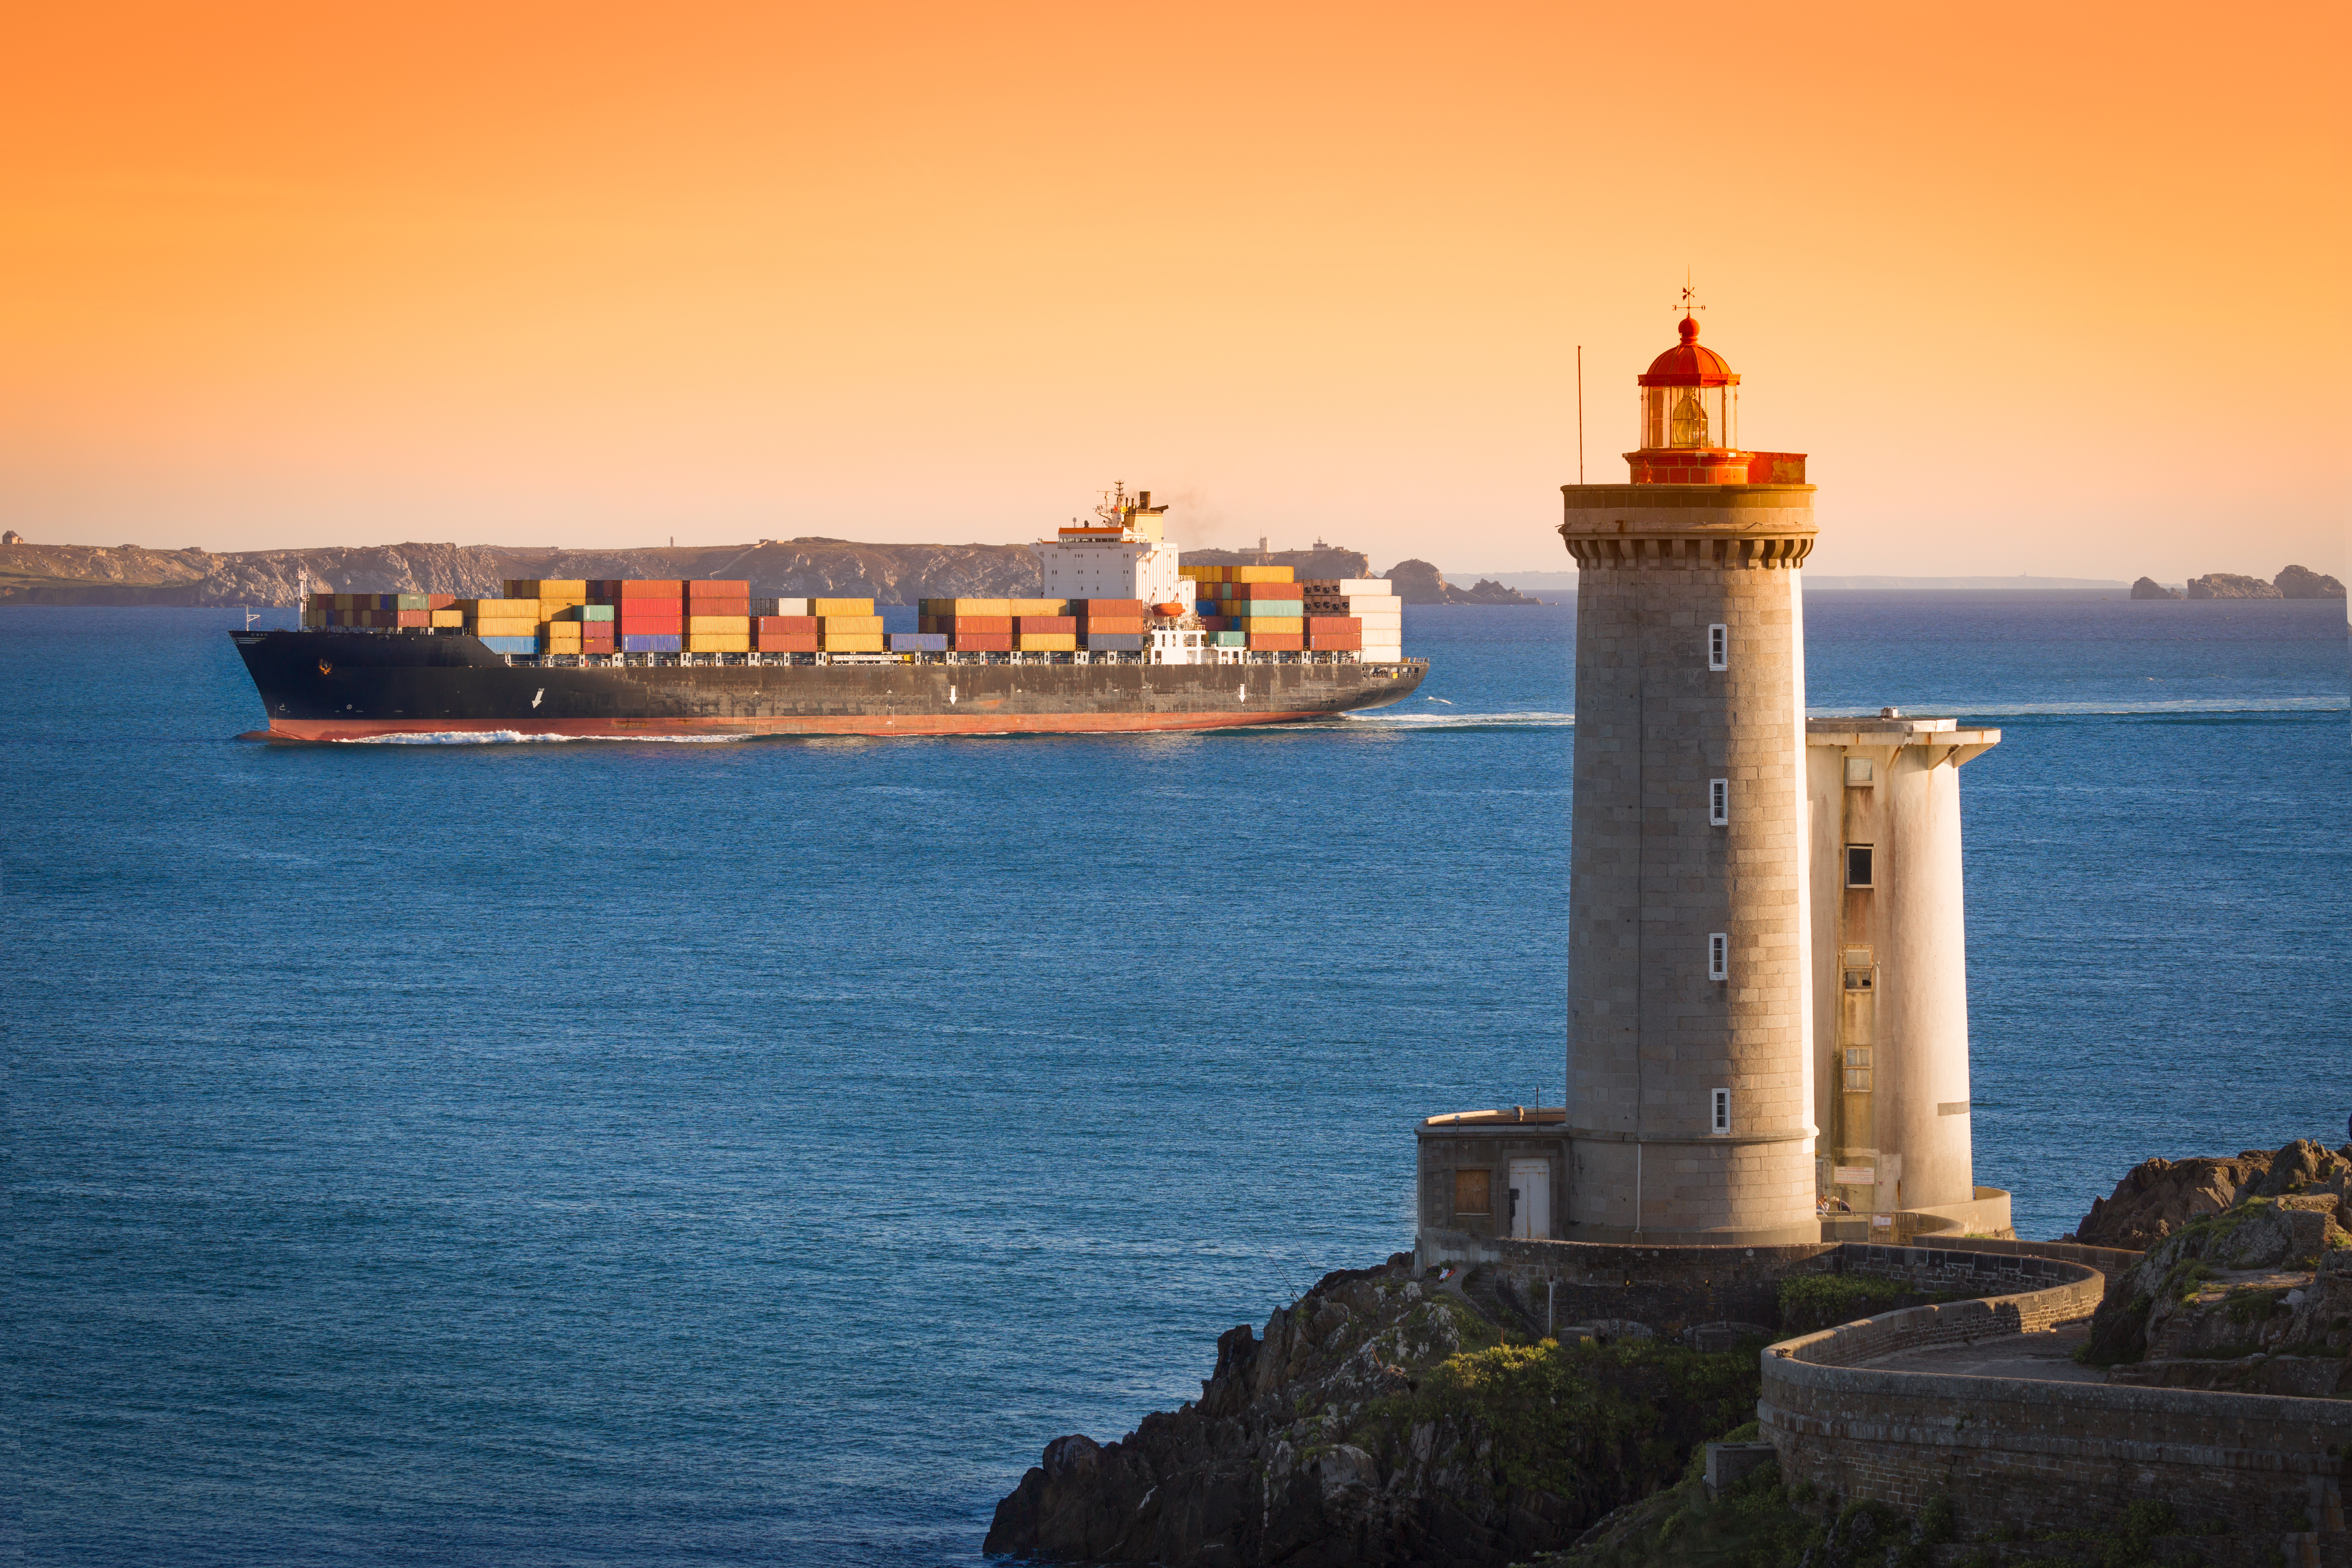 [Cargo with lighthouse at sunset]